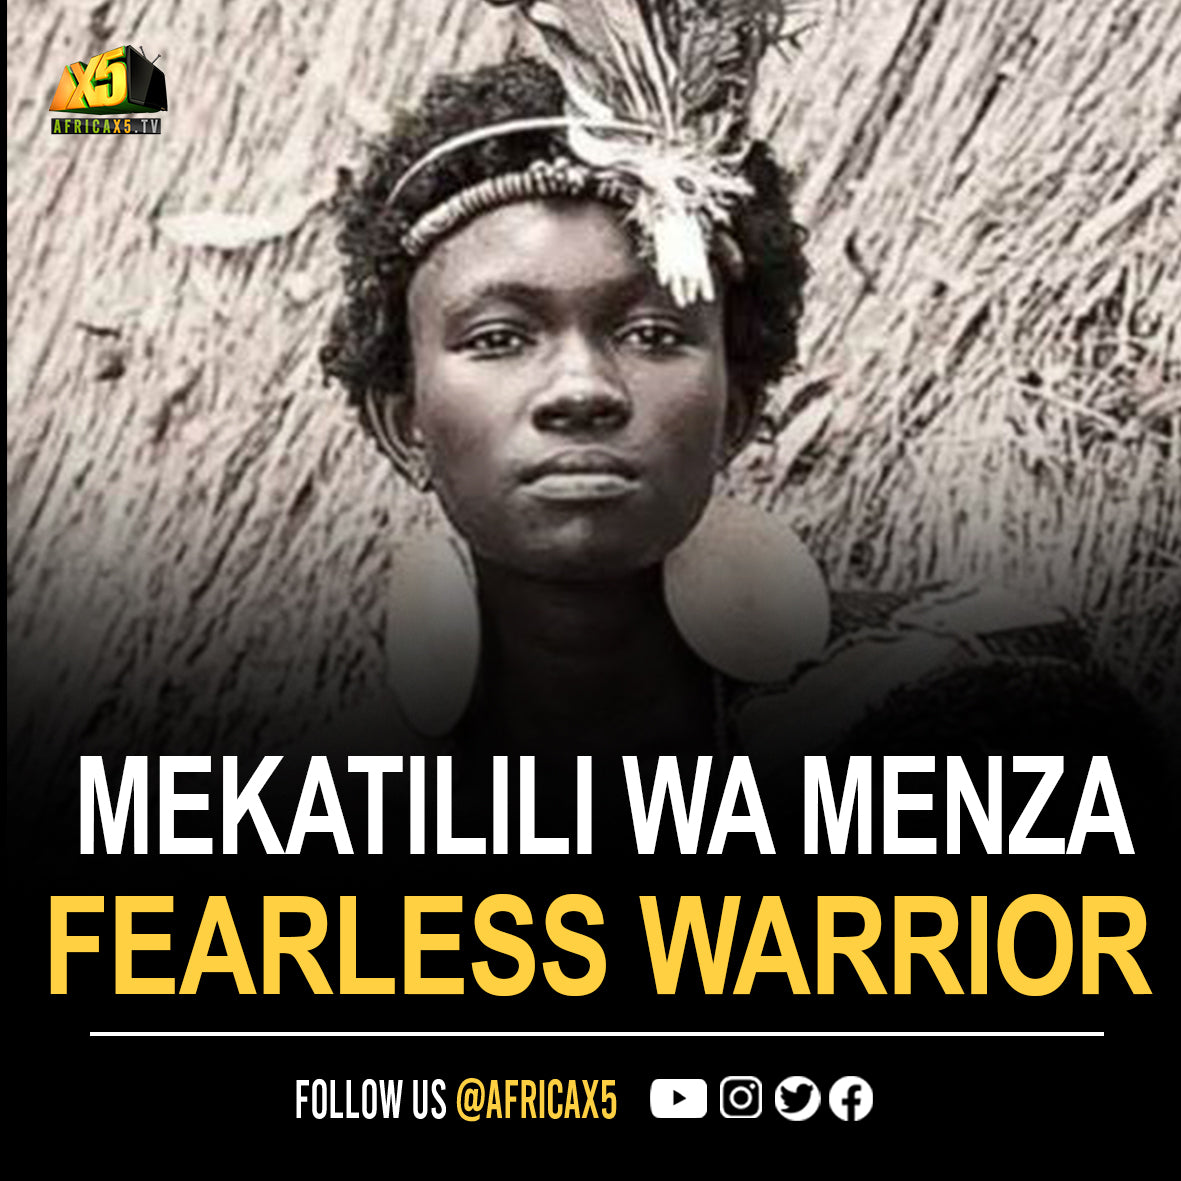 Mekatilili wa Menza was a prophetess and fearless warrior who led her people, the Giriama, to rebel against British imperialism.